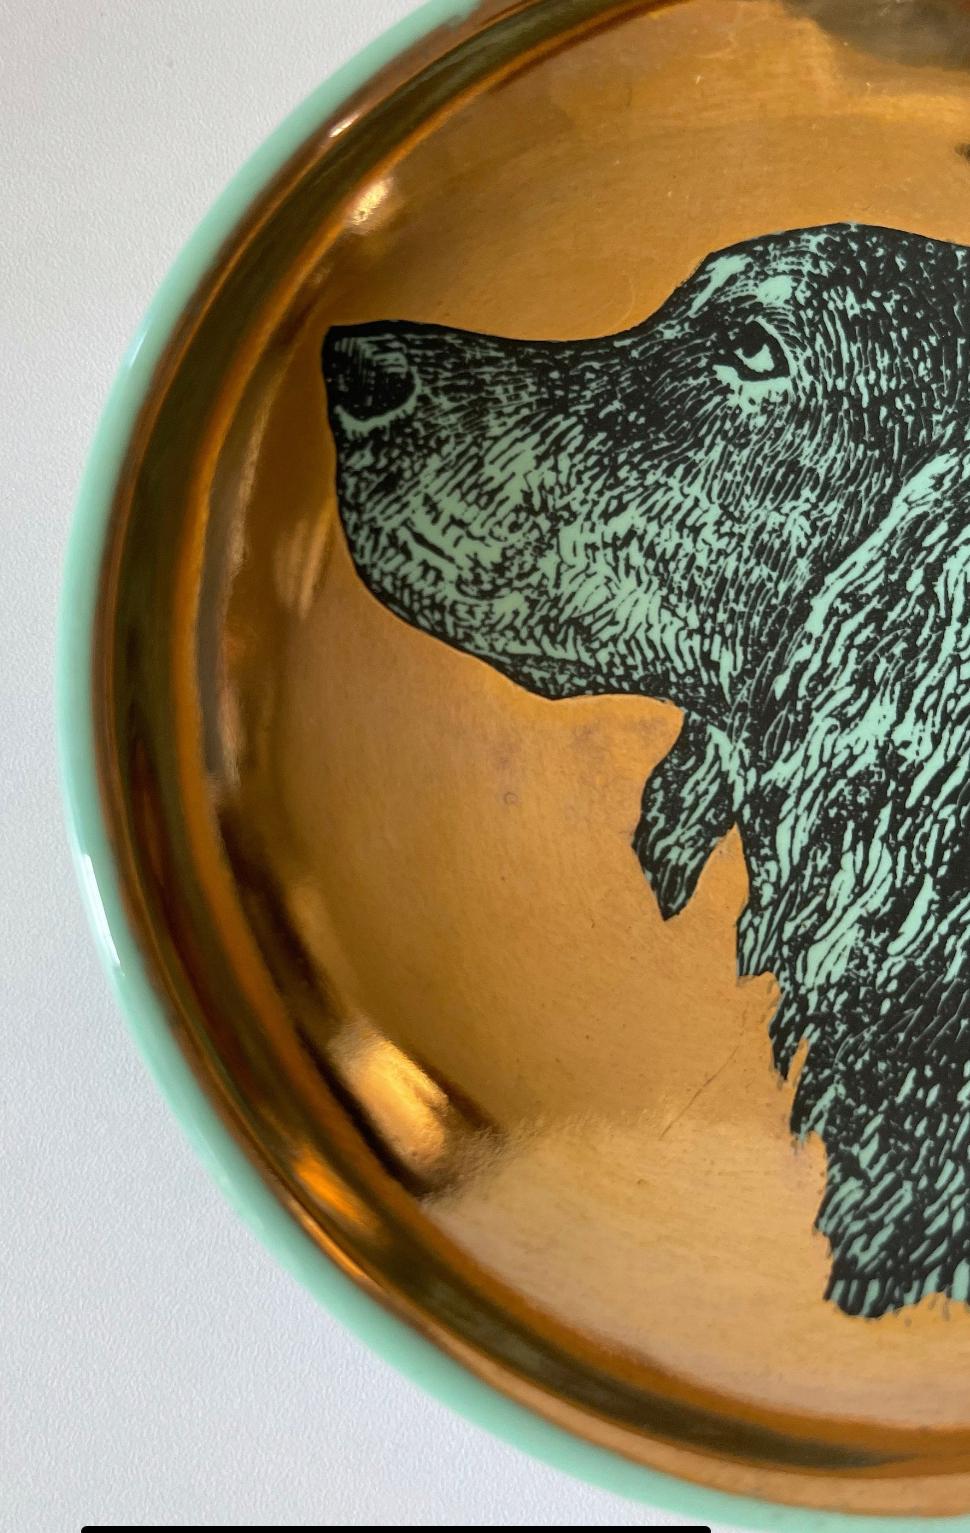 Portman Gallery (Brooklyn, NY) is joyously offering this vintage Fornasetti hollow concave ceramic dog bowl, green glaze with gilding, in very, very good vintage condition.

I have never been able to offer a bowl like this in a) such good condition